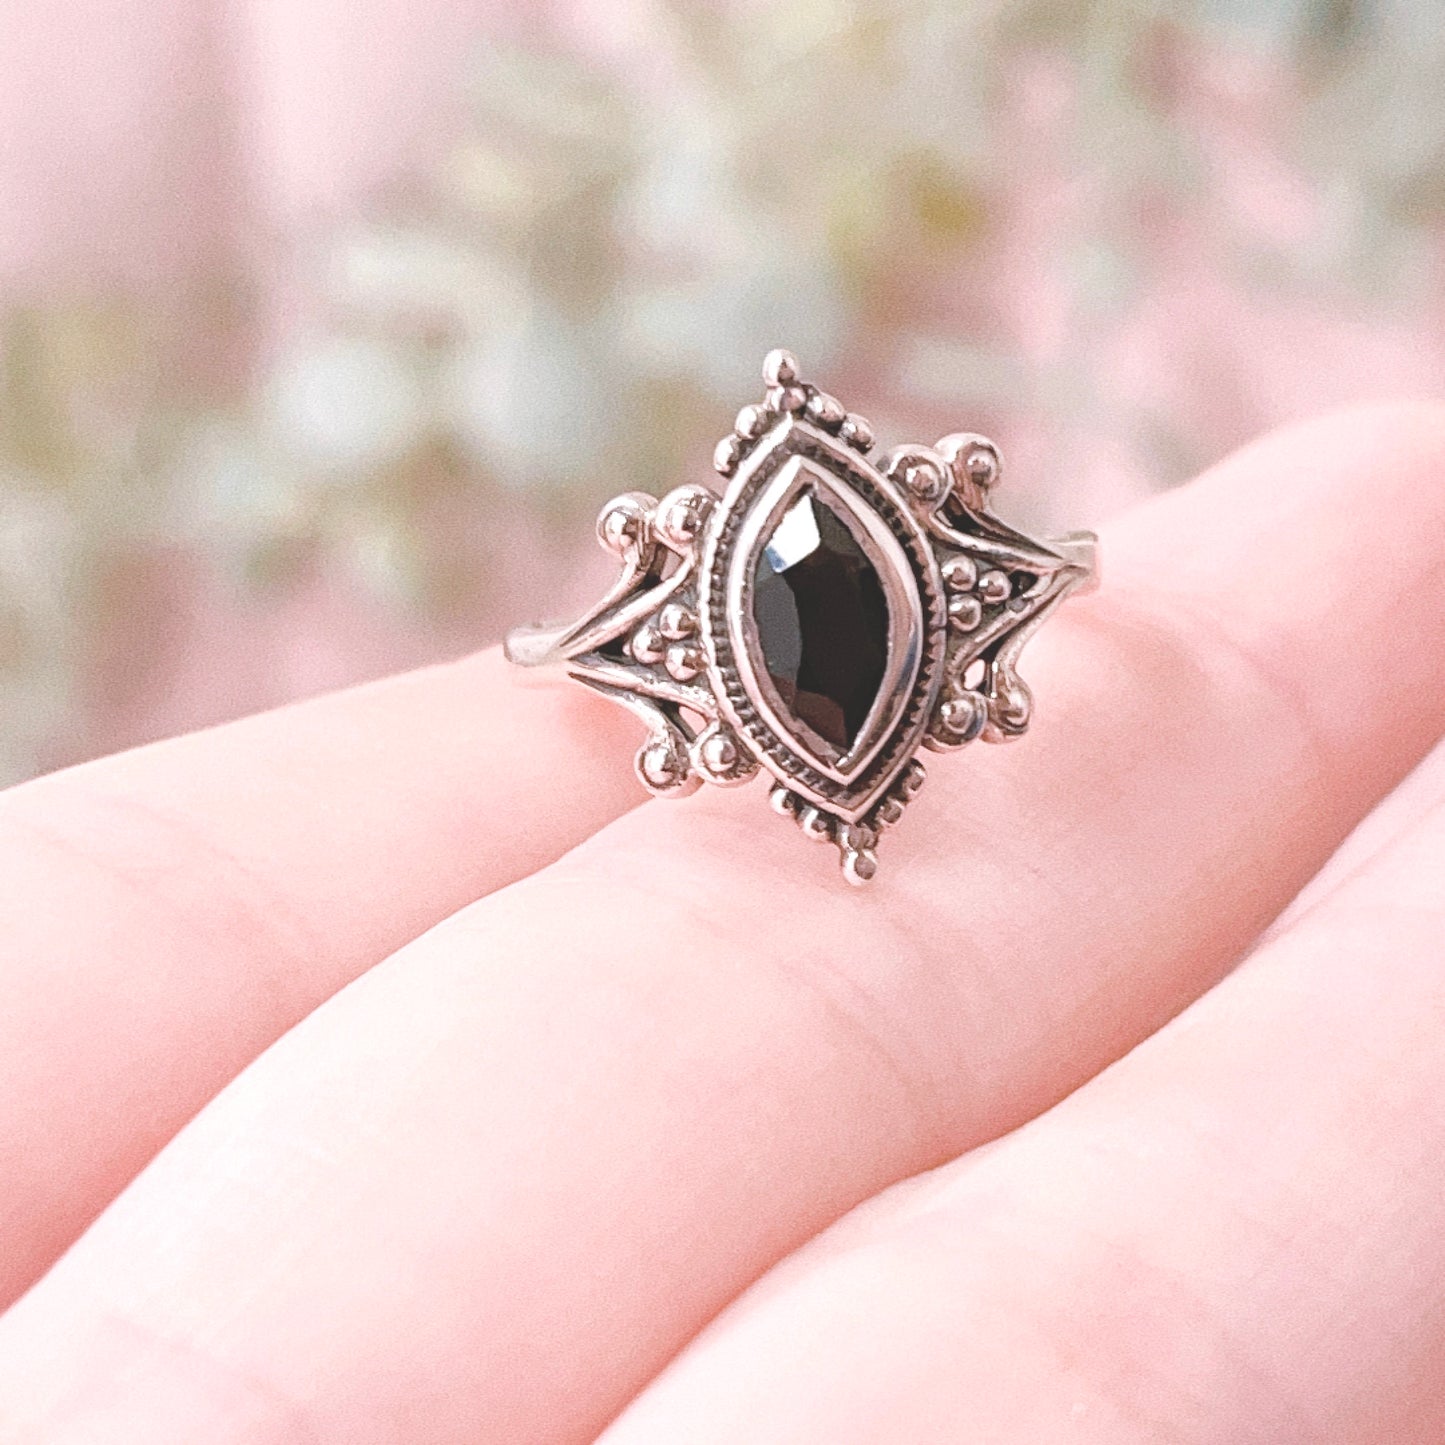 Black Onyx 925 Sterling Silver Ring - Size 7